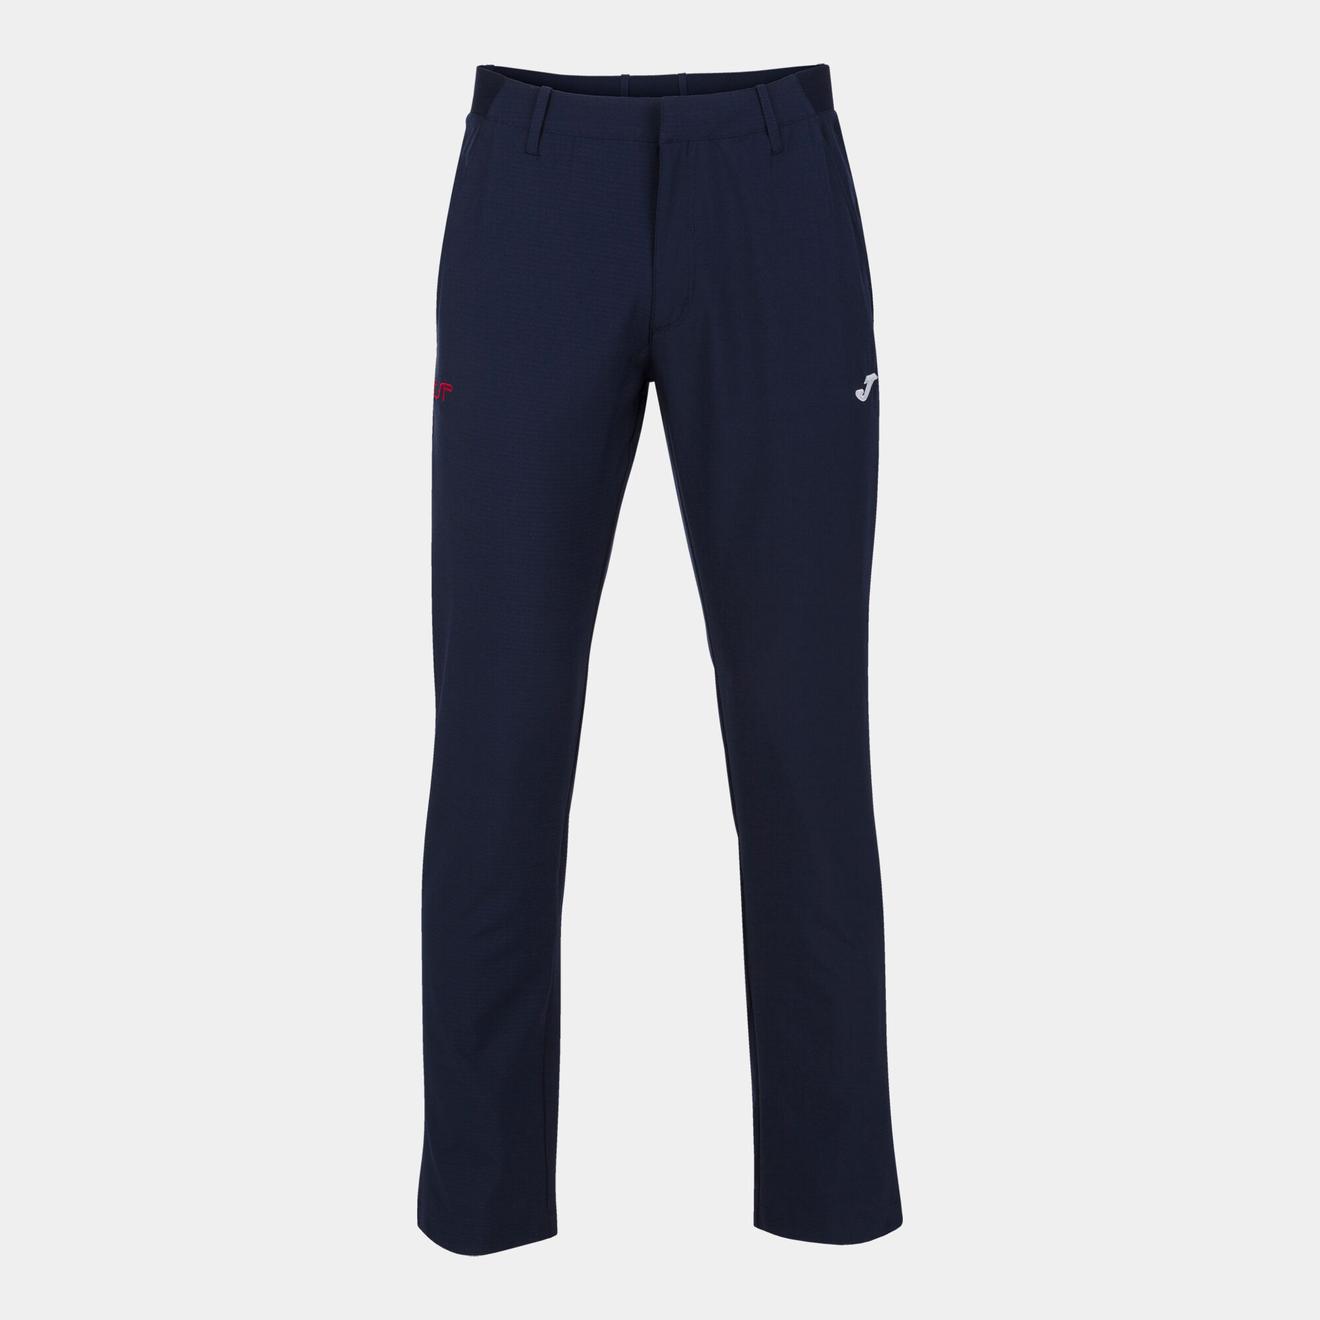 Longs pants Spanish Olympic Committee offers at £34.68 in Joma